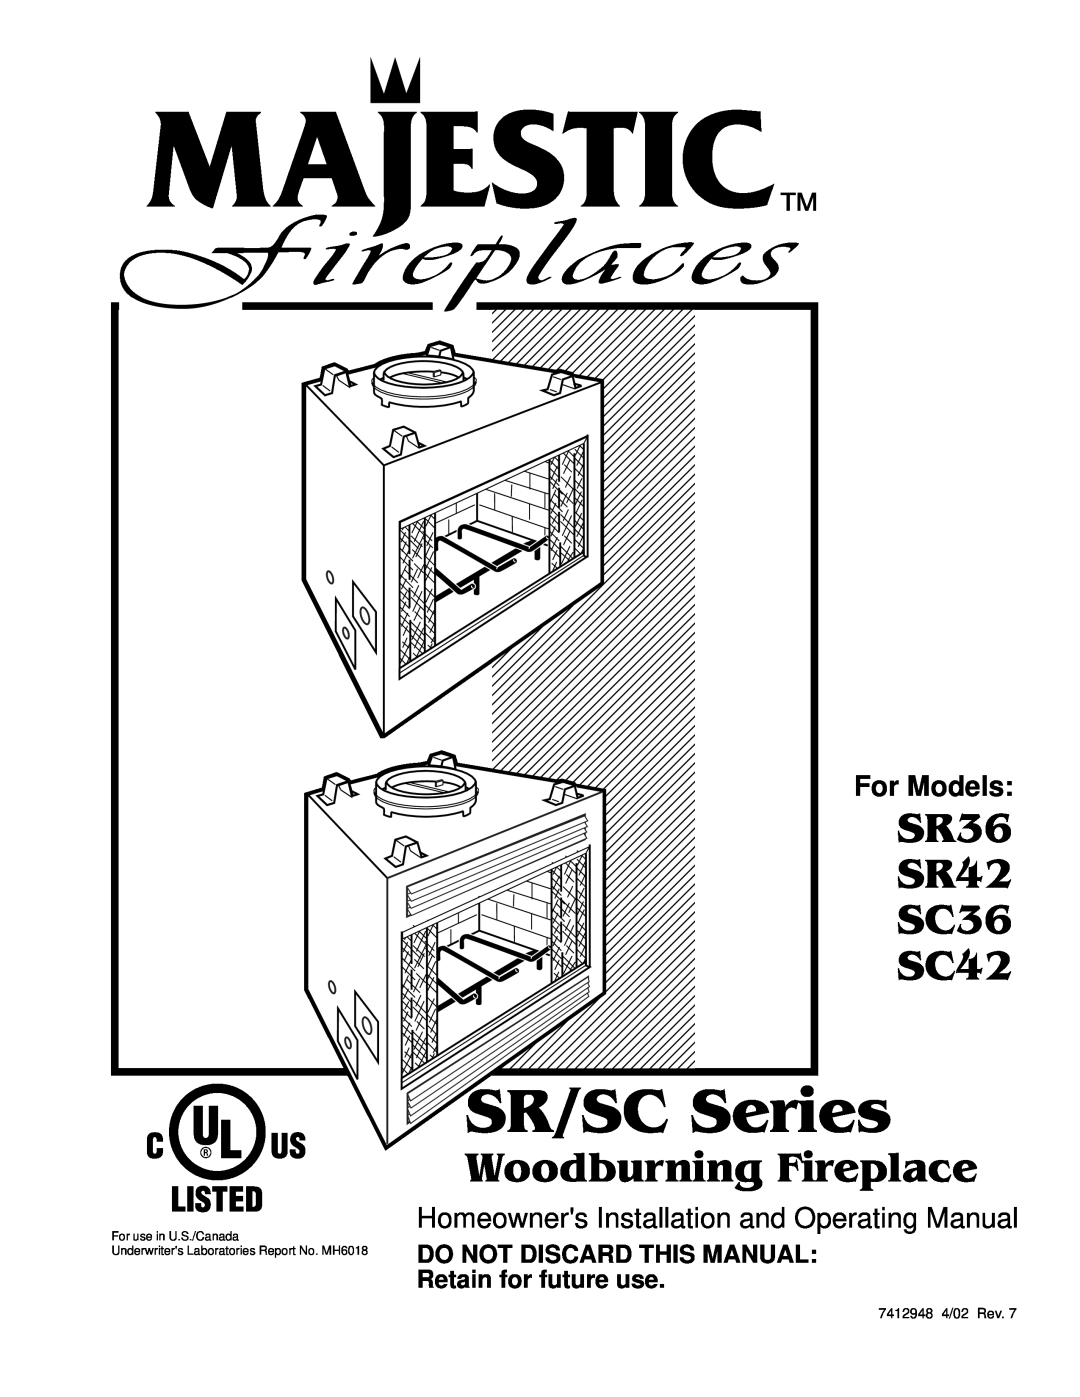 Vermont Casting SR36 manual Majestic Fireplaces SR/SC Series, DO NOT DISCARD THIS MANUAL Retain for future use, SR42, SC36 